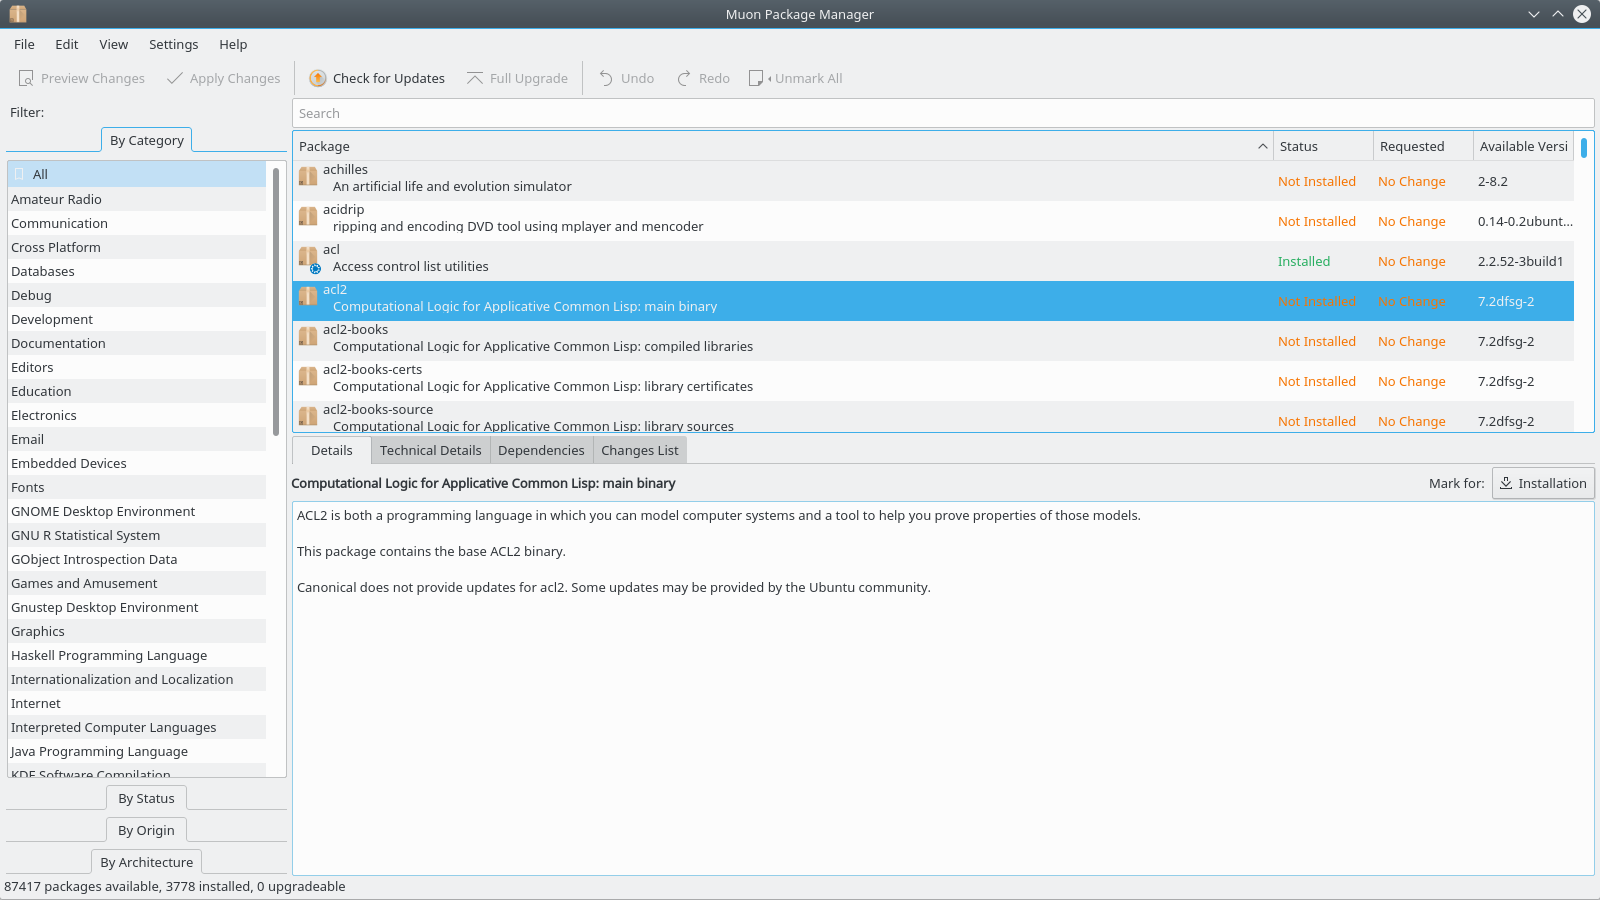 Screenshot of Muon Package Manager